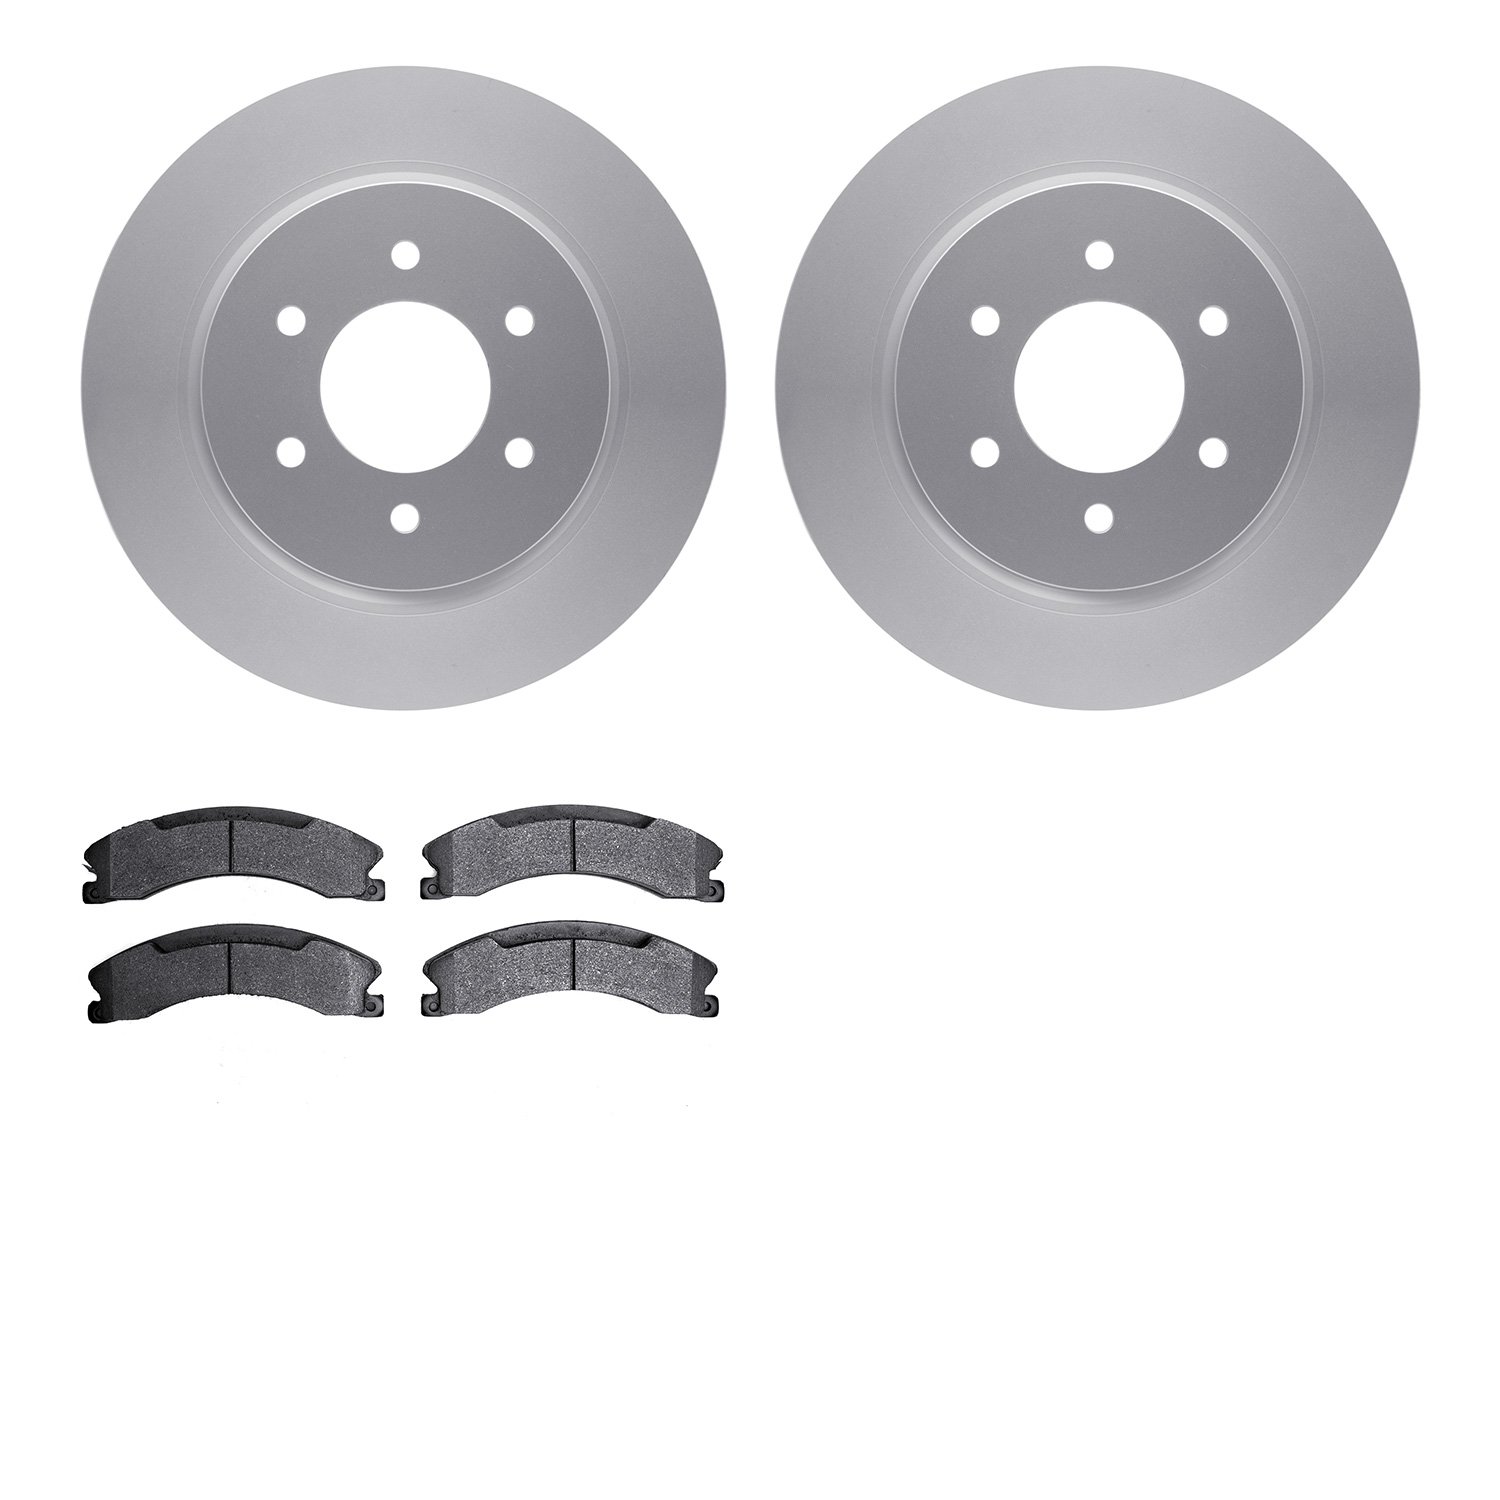 4402-67008 Geospec Brake Rotors with Ultimate-Duty Brake Pads Kit, Fits Select Infiniti/Nissan, Position: Front